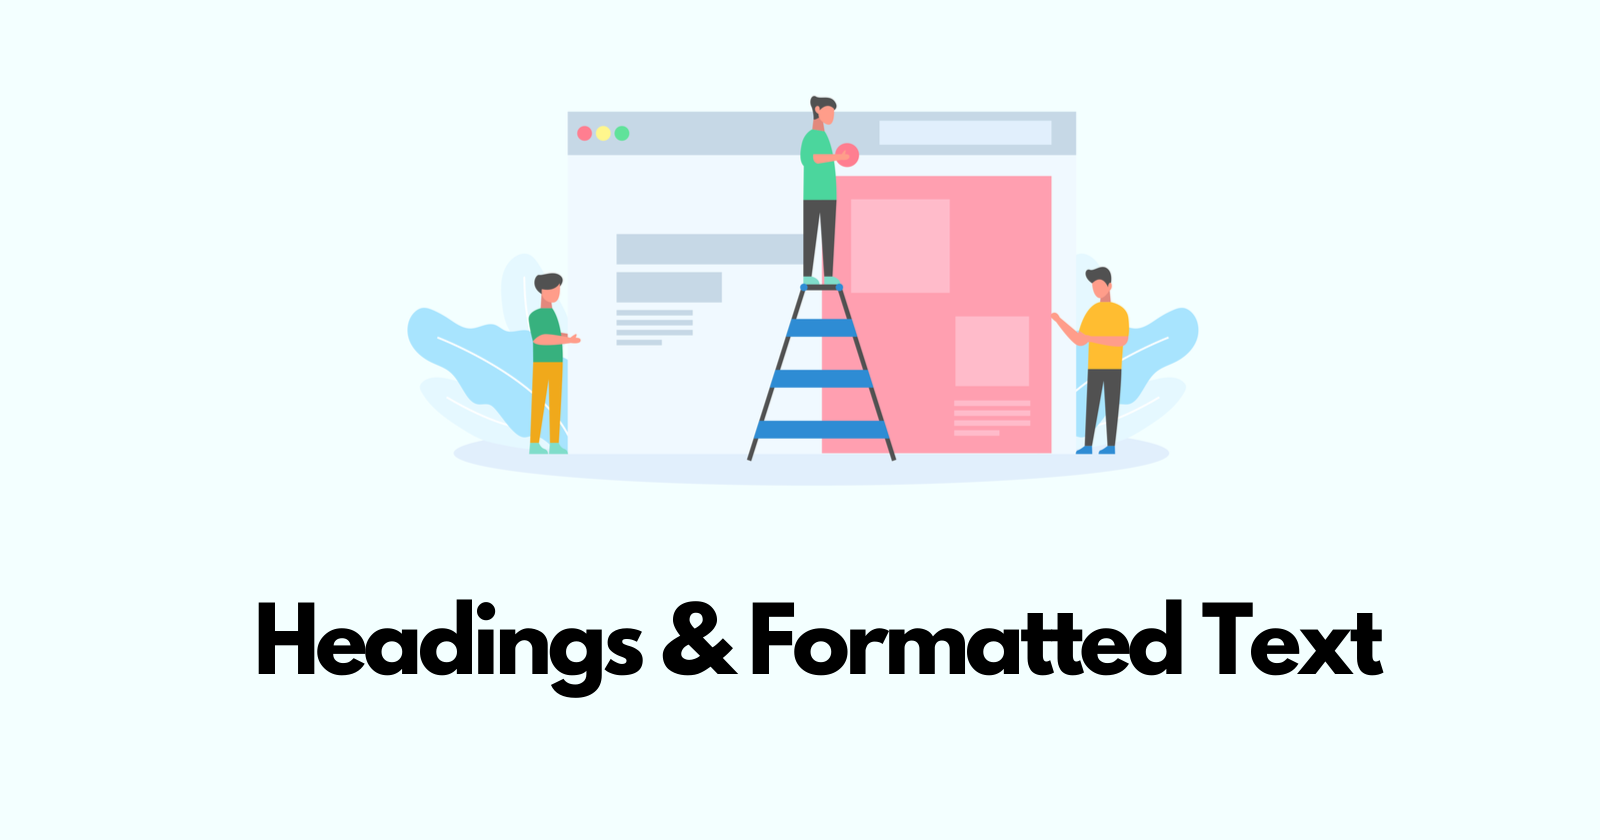 Headings & Formatted Text